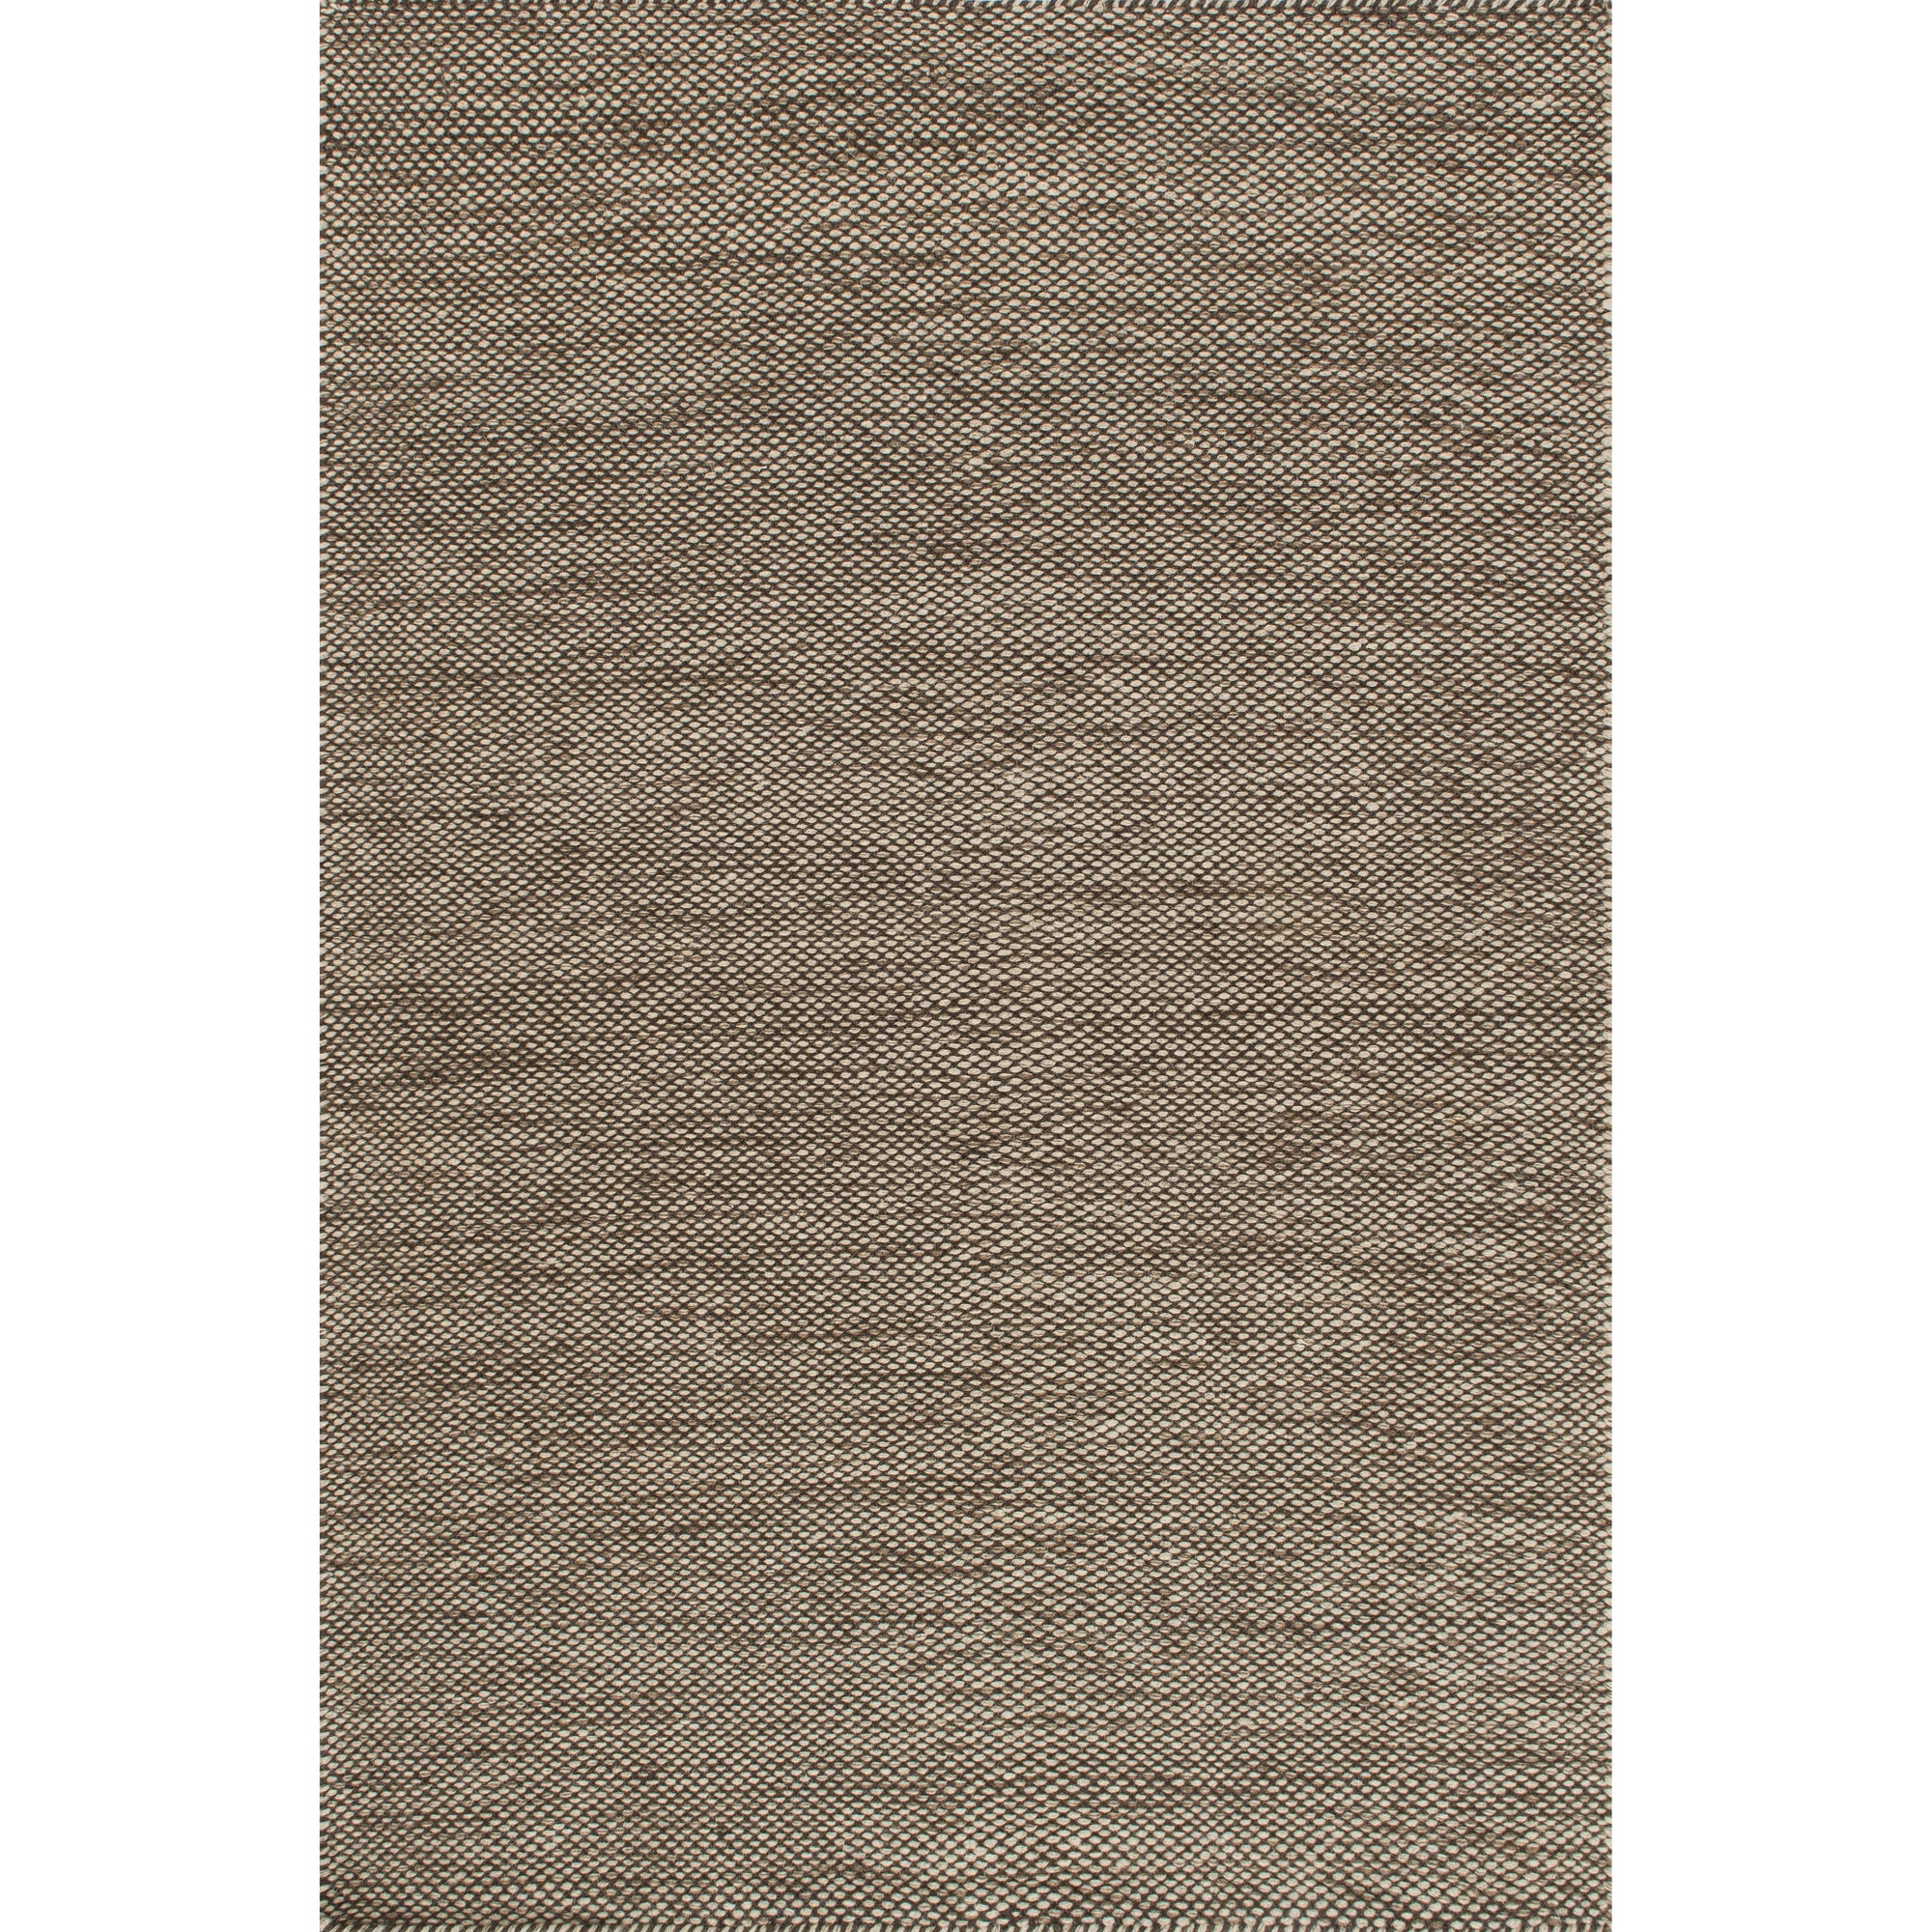 Rugs by Roo Loloi Oakwood Stone Area Rug in size 3' 6" x 5' 6"